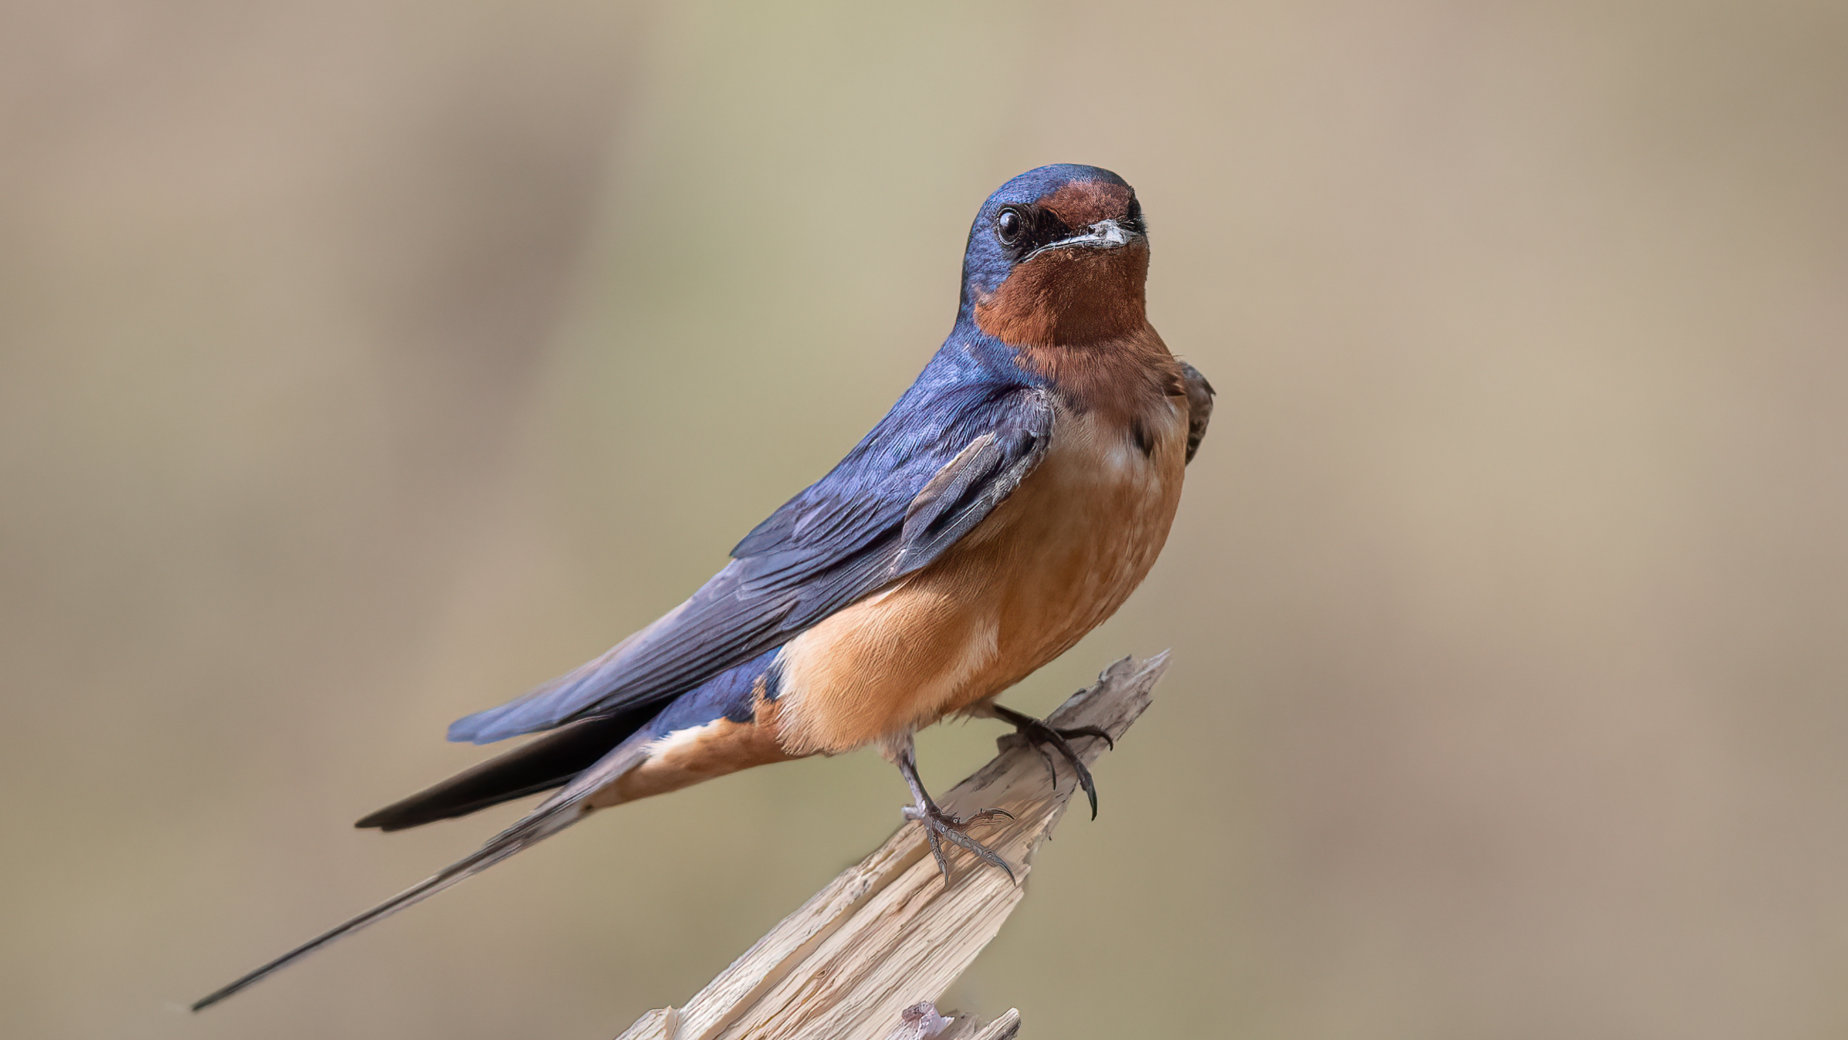 A brief pause, Barn Swallow by Jean-Louis Rousselle